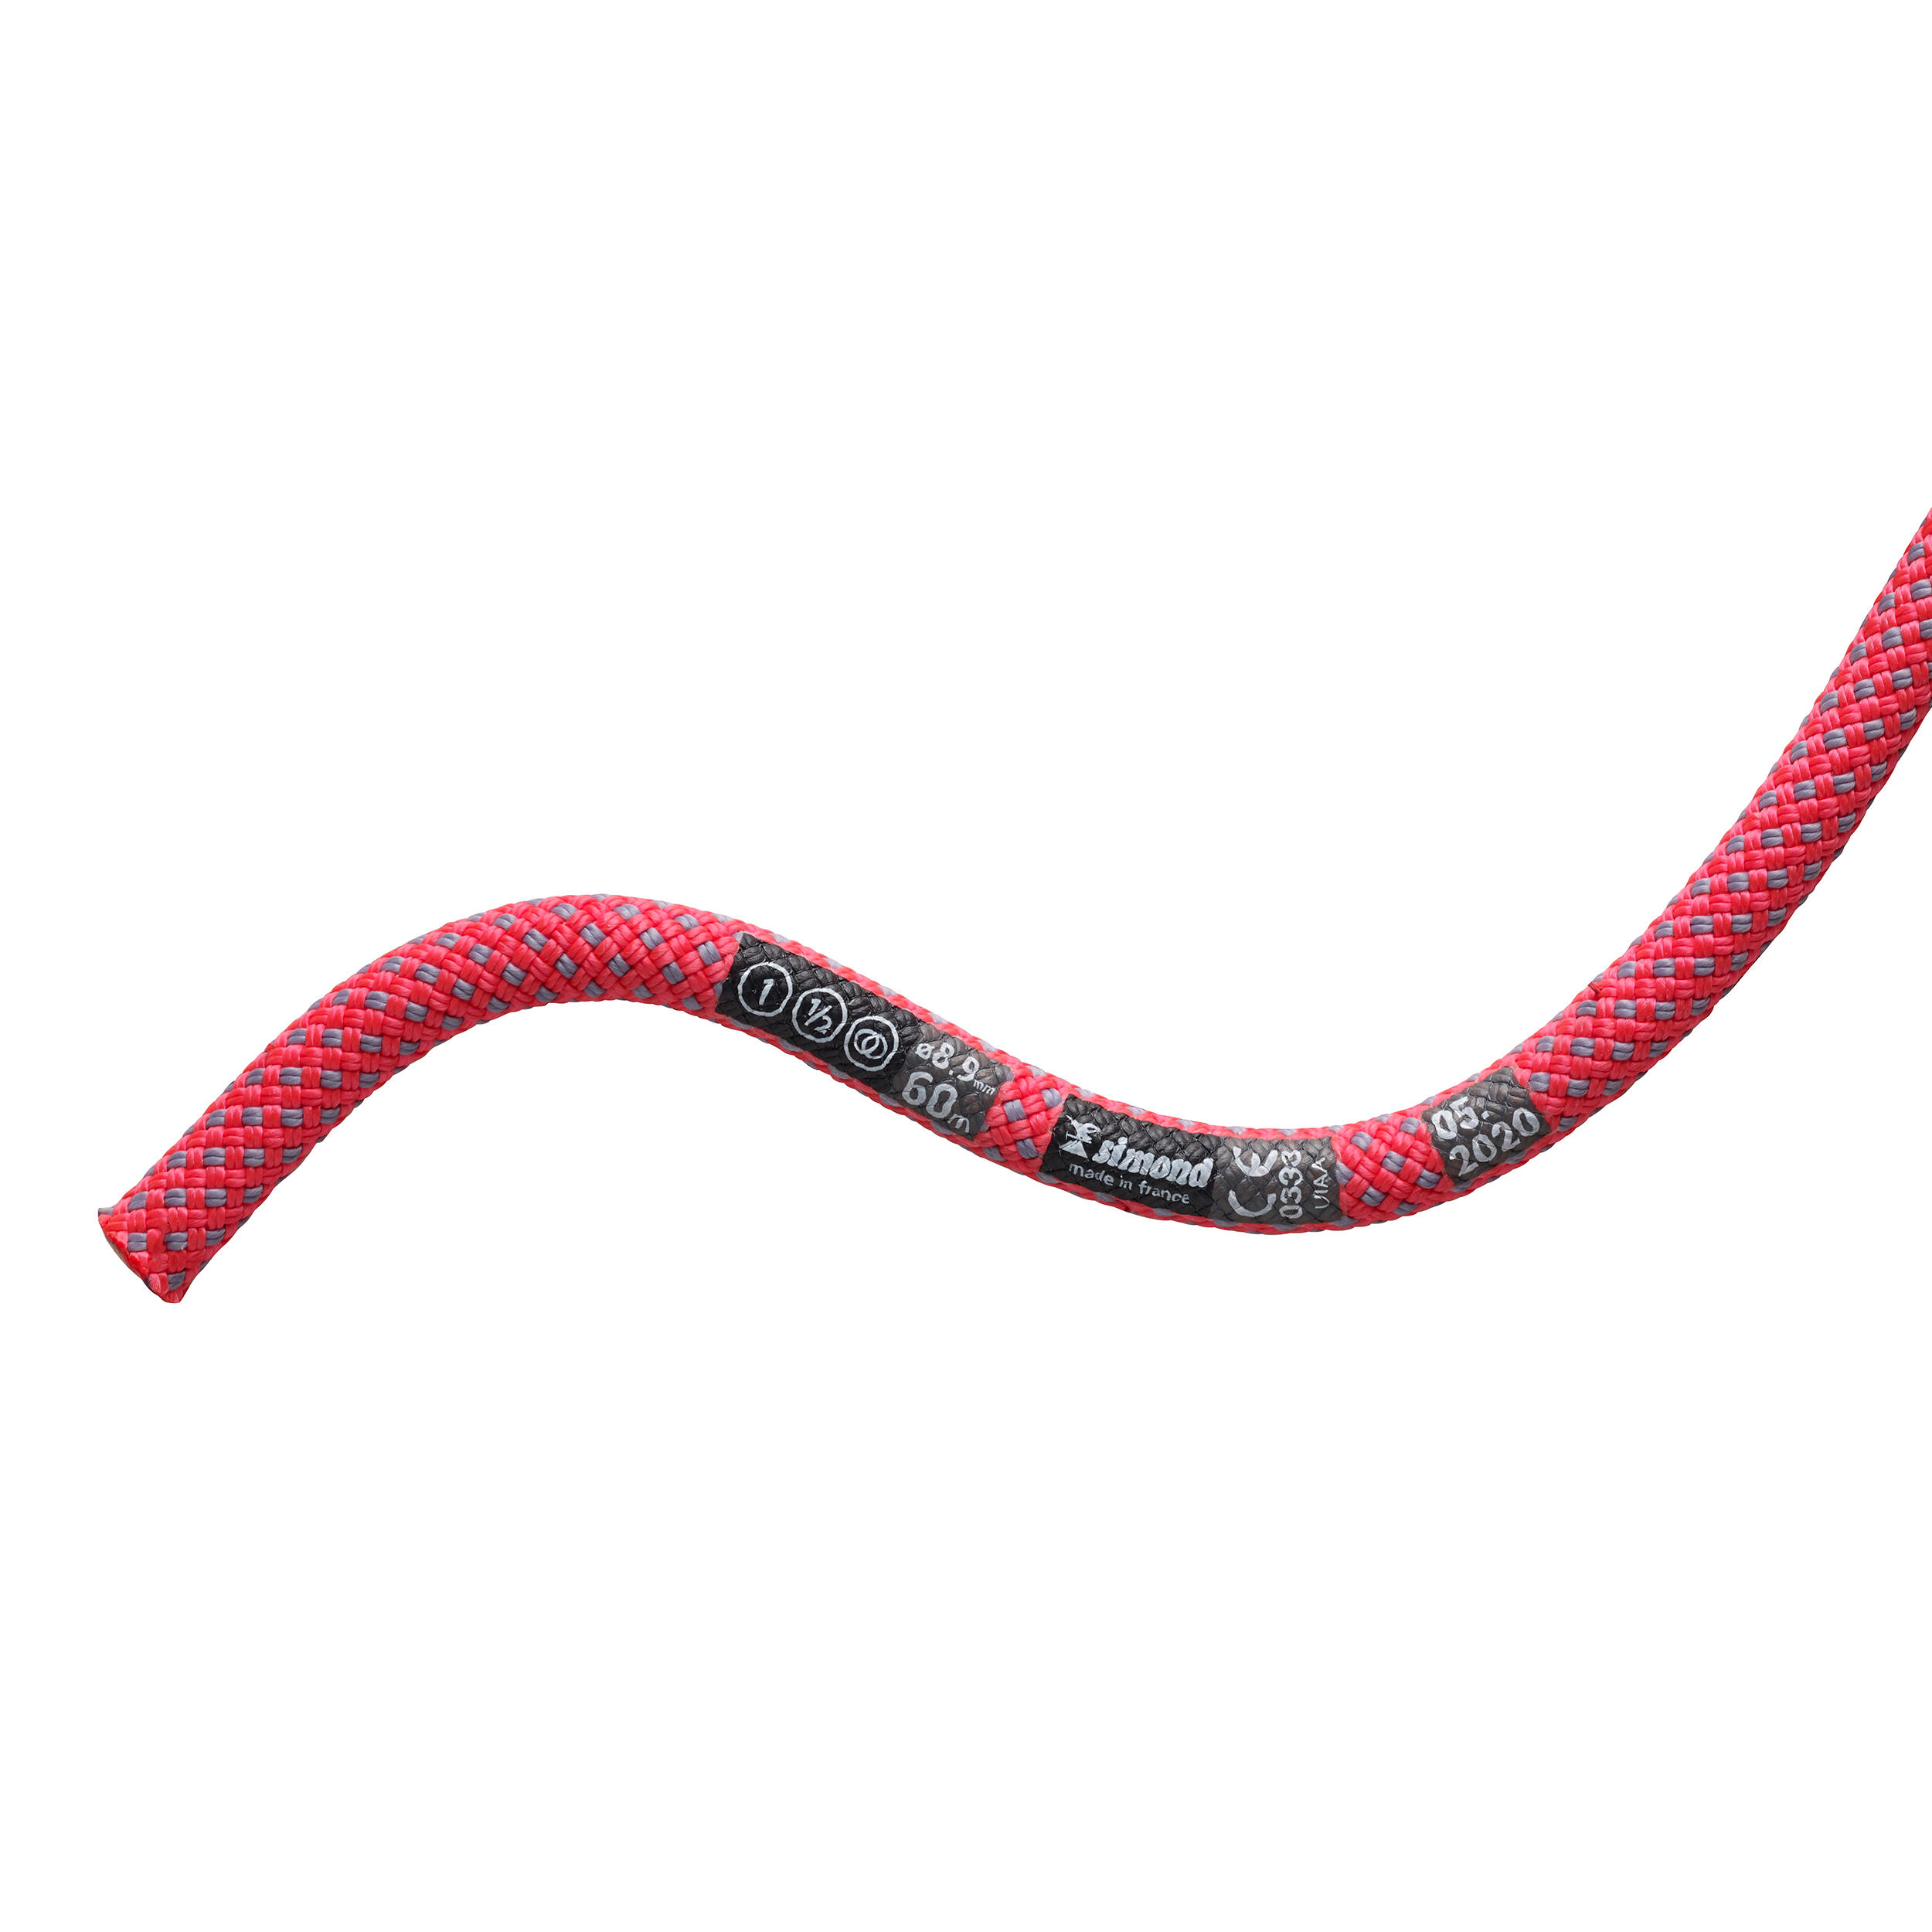 CLIMBING AND MOUNTAINEERING TRIPLE ROPE STANDARD 8.9 mm x 60 m - EDGE DRY PINK 3/4